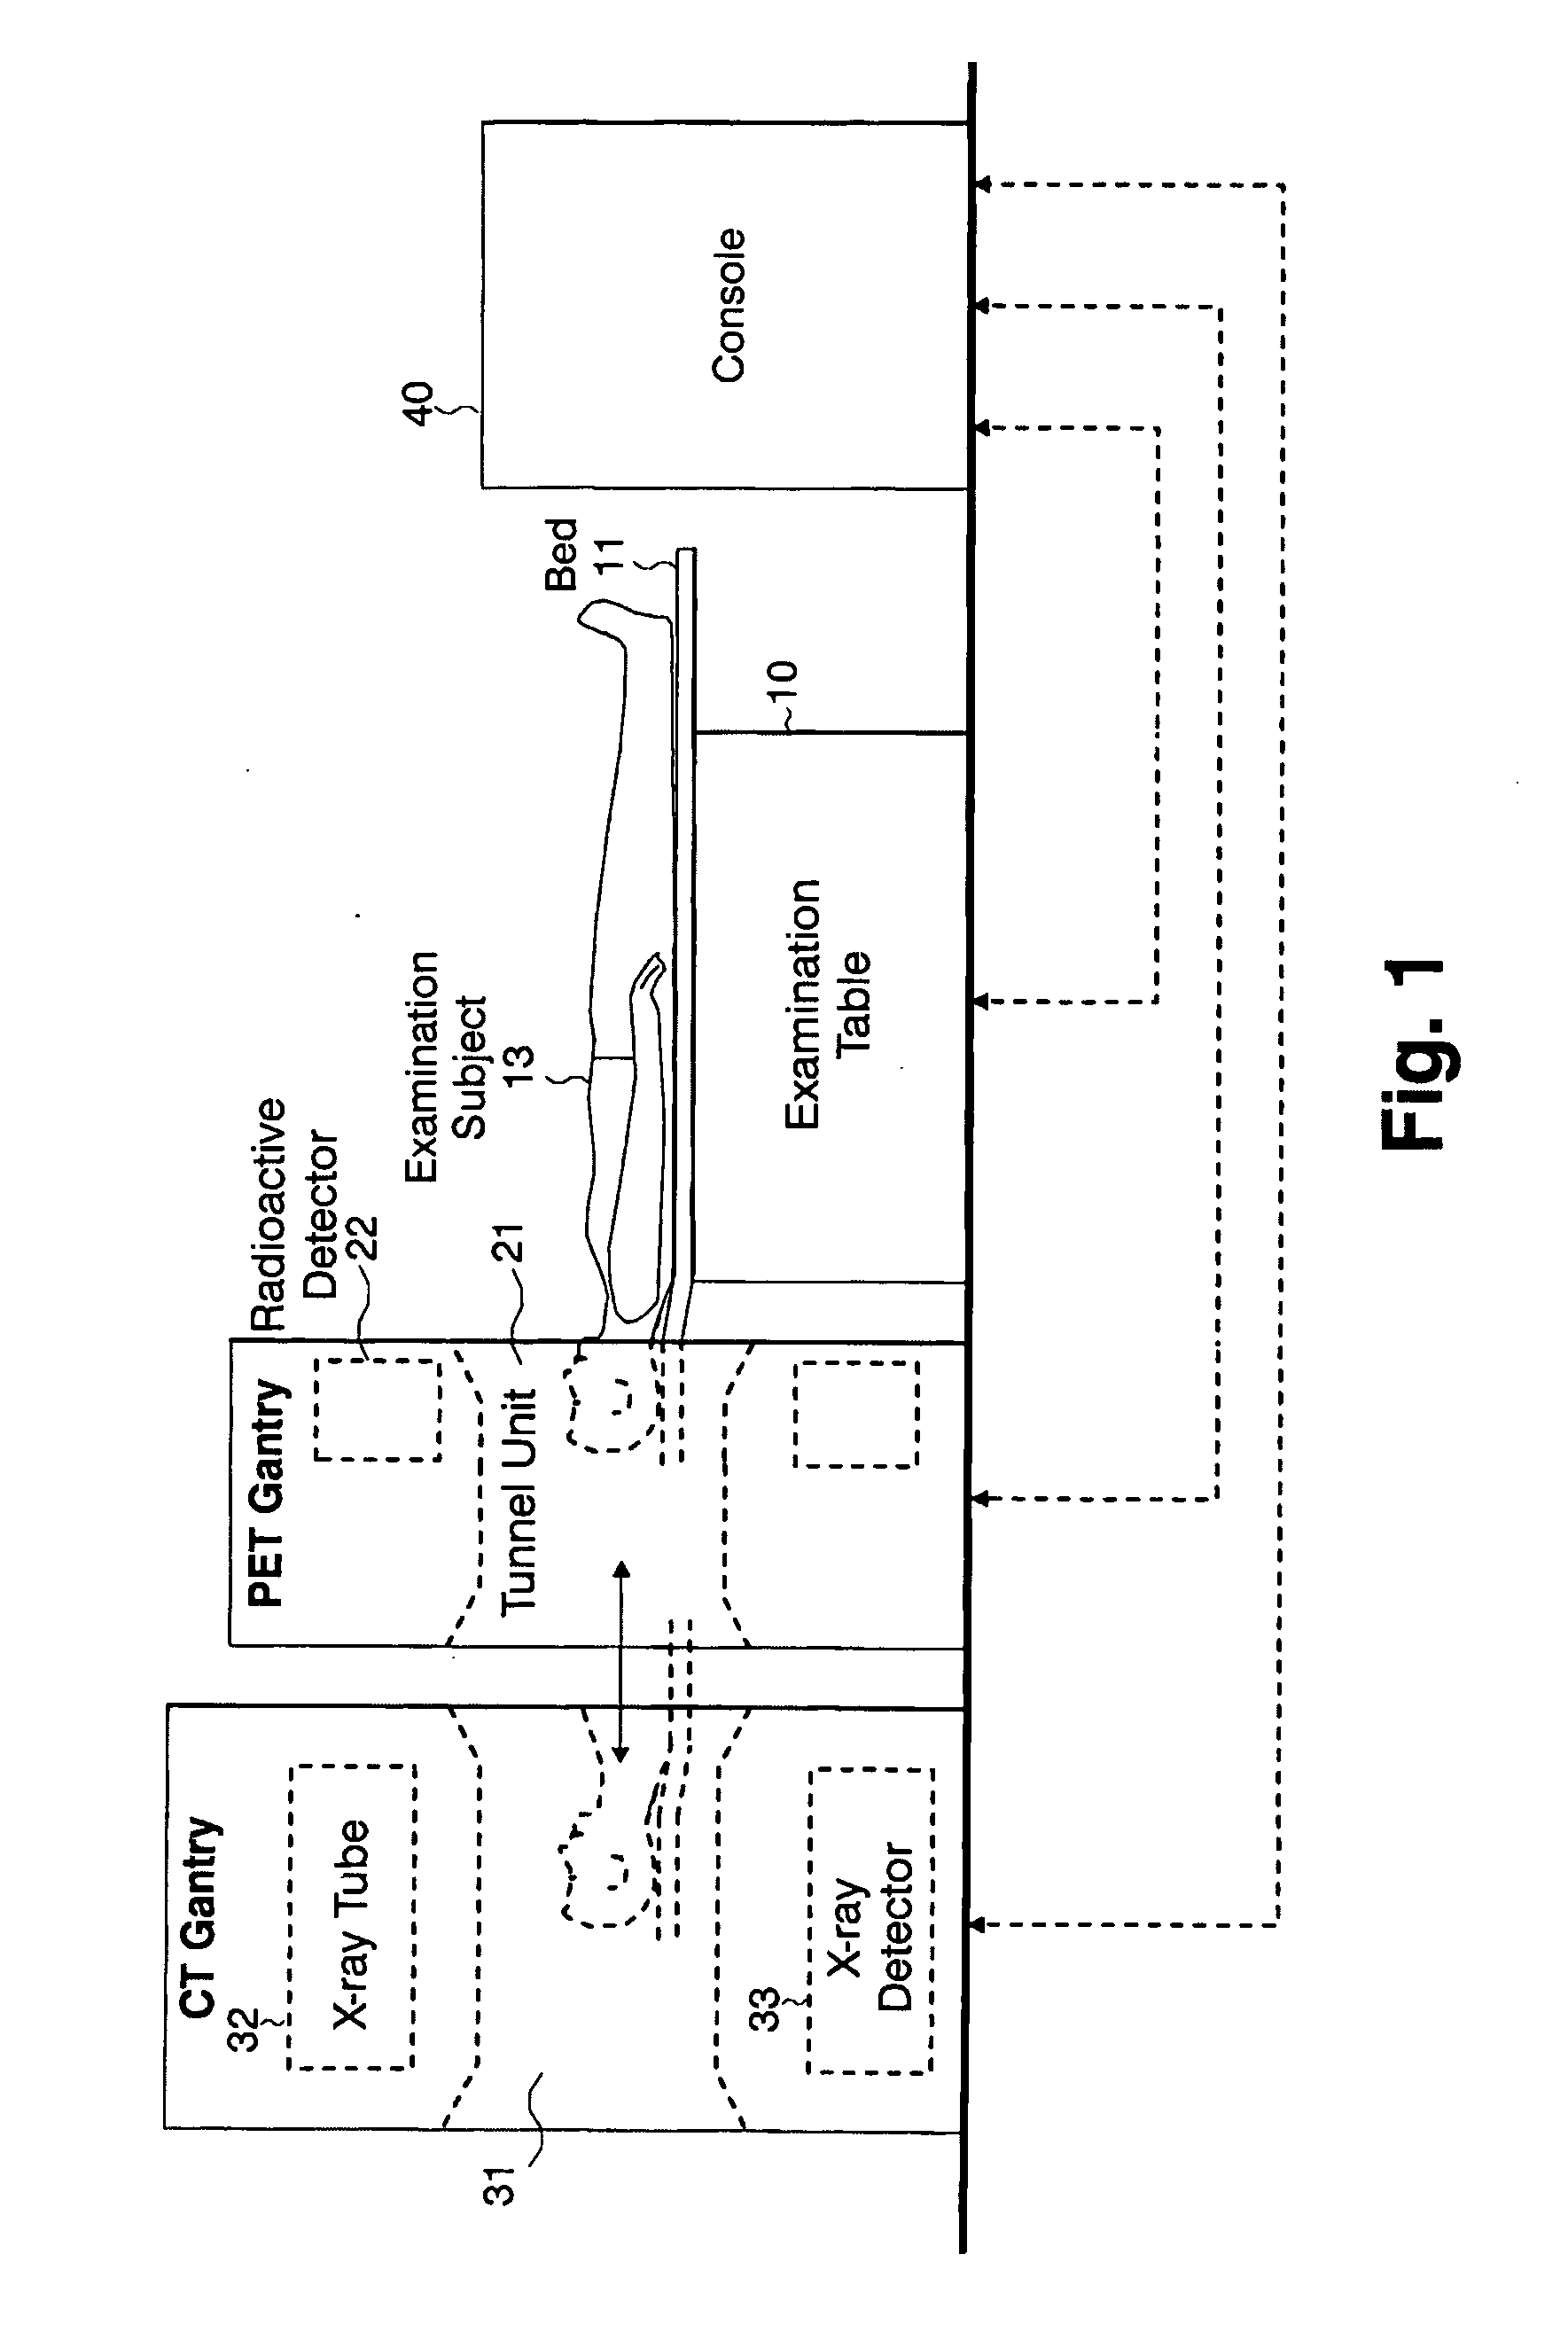 Diagnostic imaging device for medical use